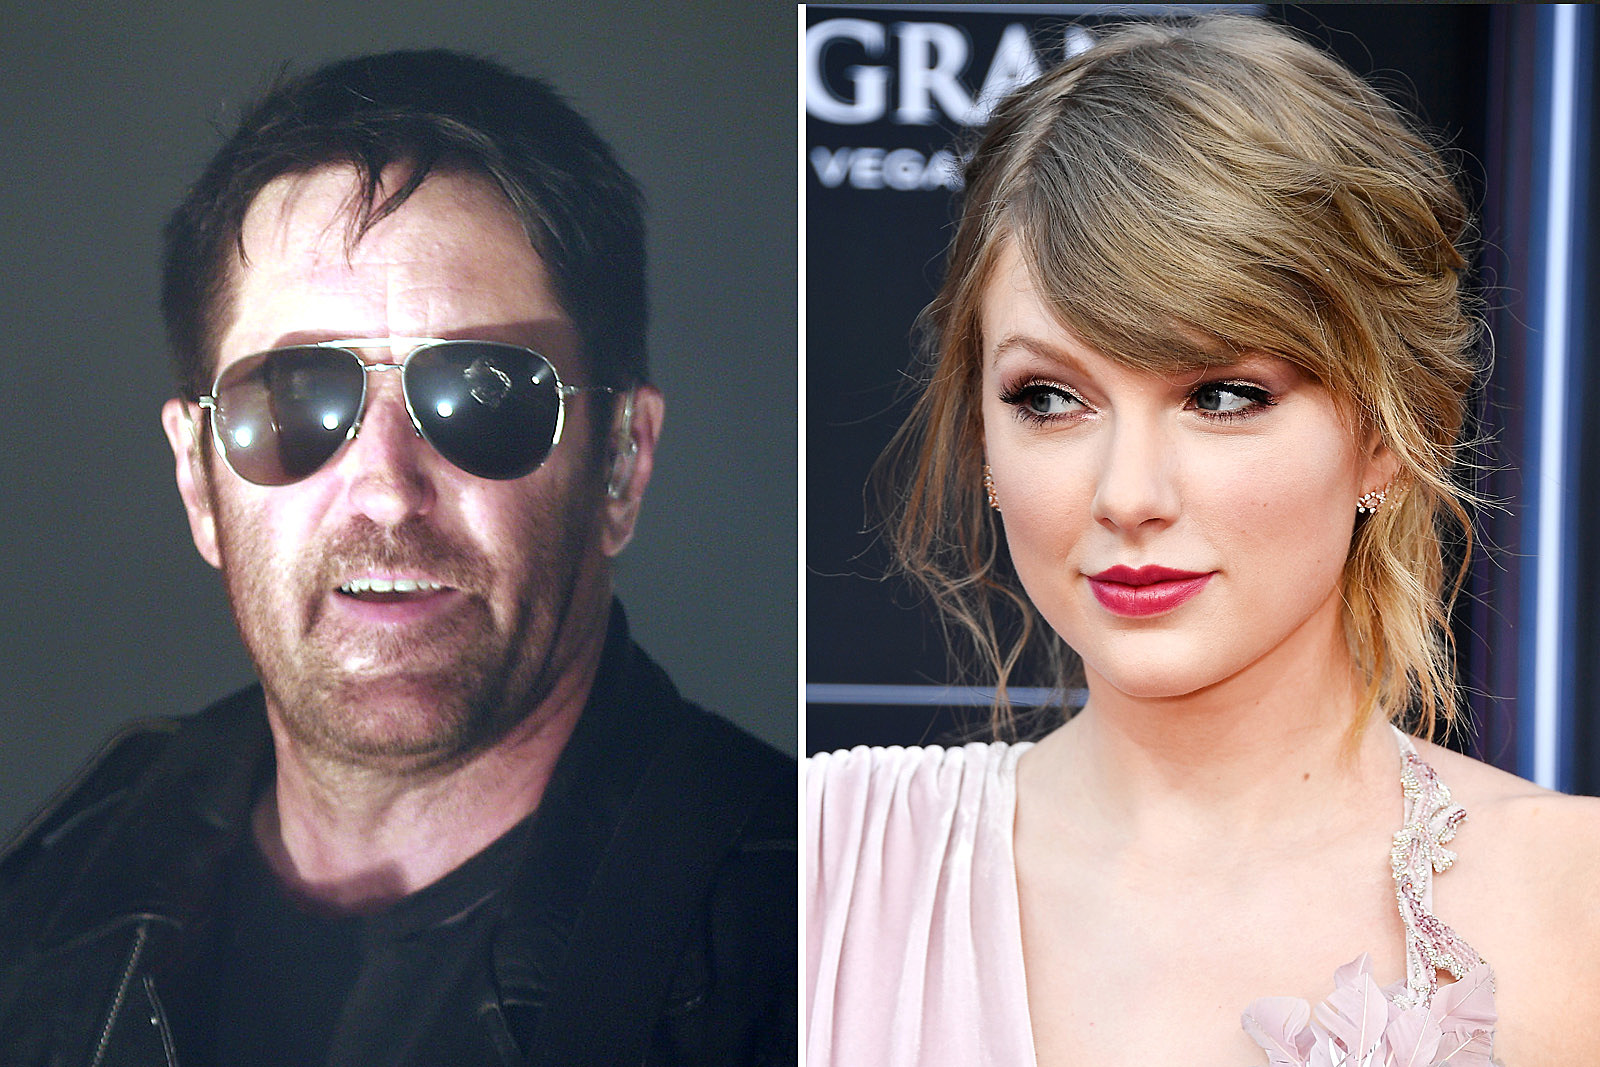 Taylor Swift Blowjob Porn - Trent Reznor Slams 'Taylor Swifts' Who Keep Politics Out of Music